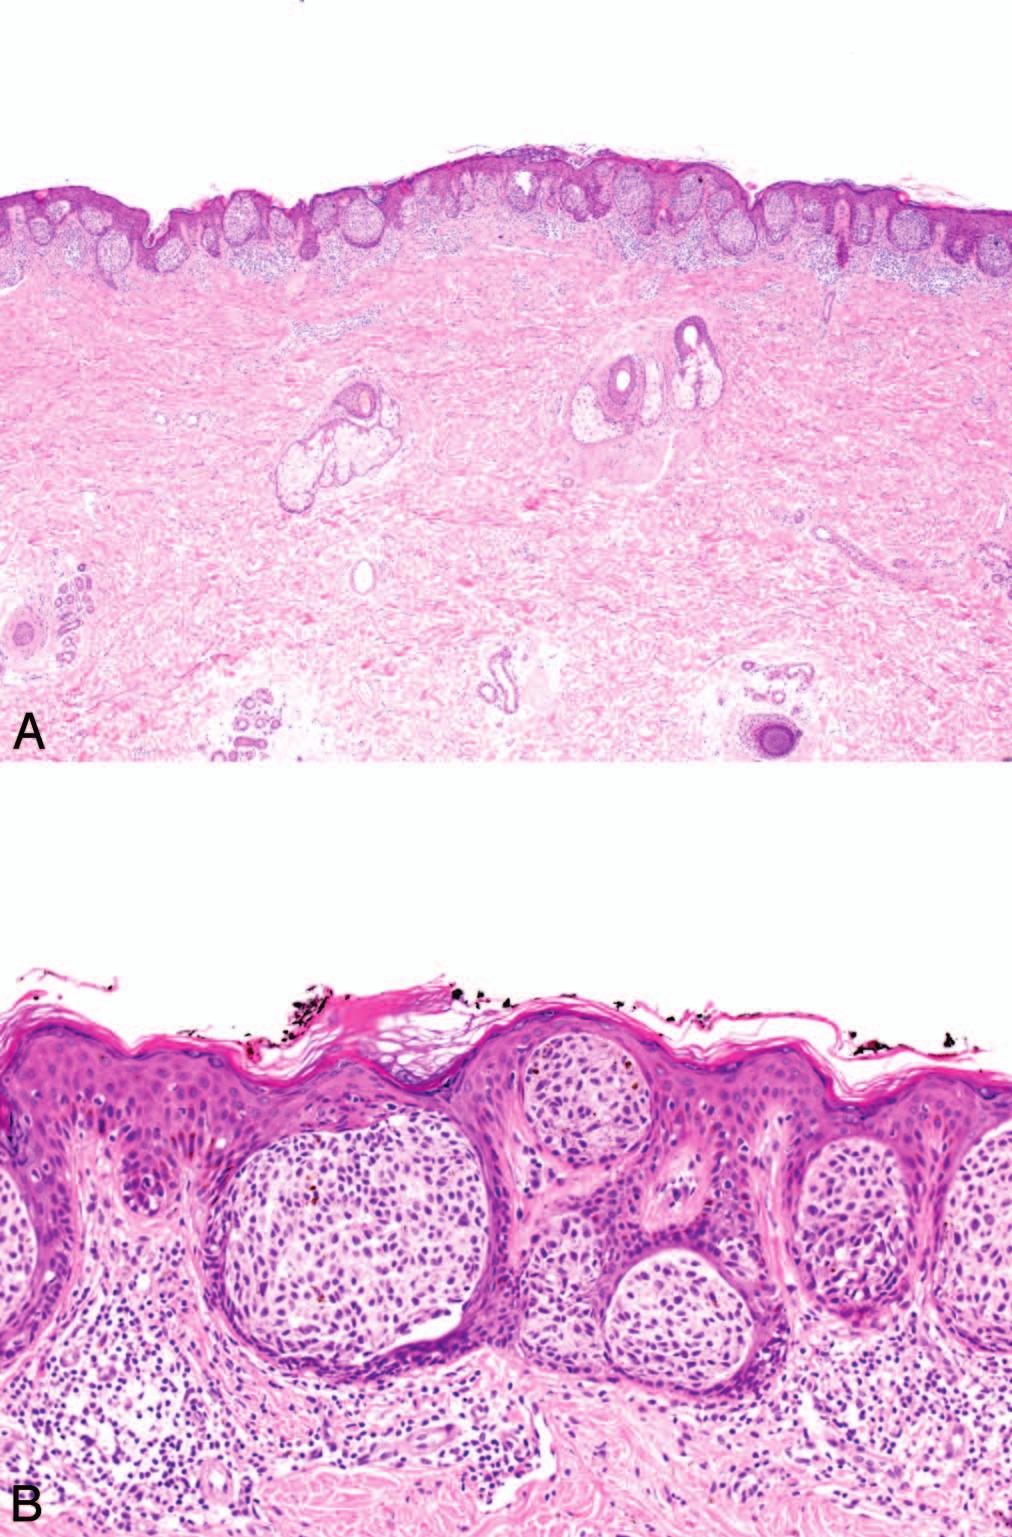 Figure 8. The nested variant of melanoma. These lesions are characterized by a predominantly nested pattern, imparting a resemblance to junctional nevi on low-power examination (A).